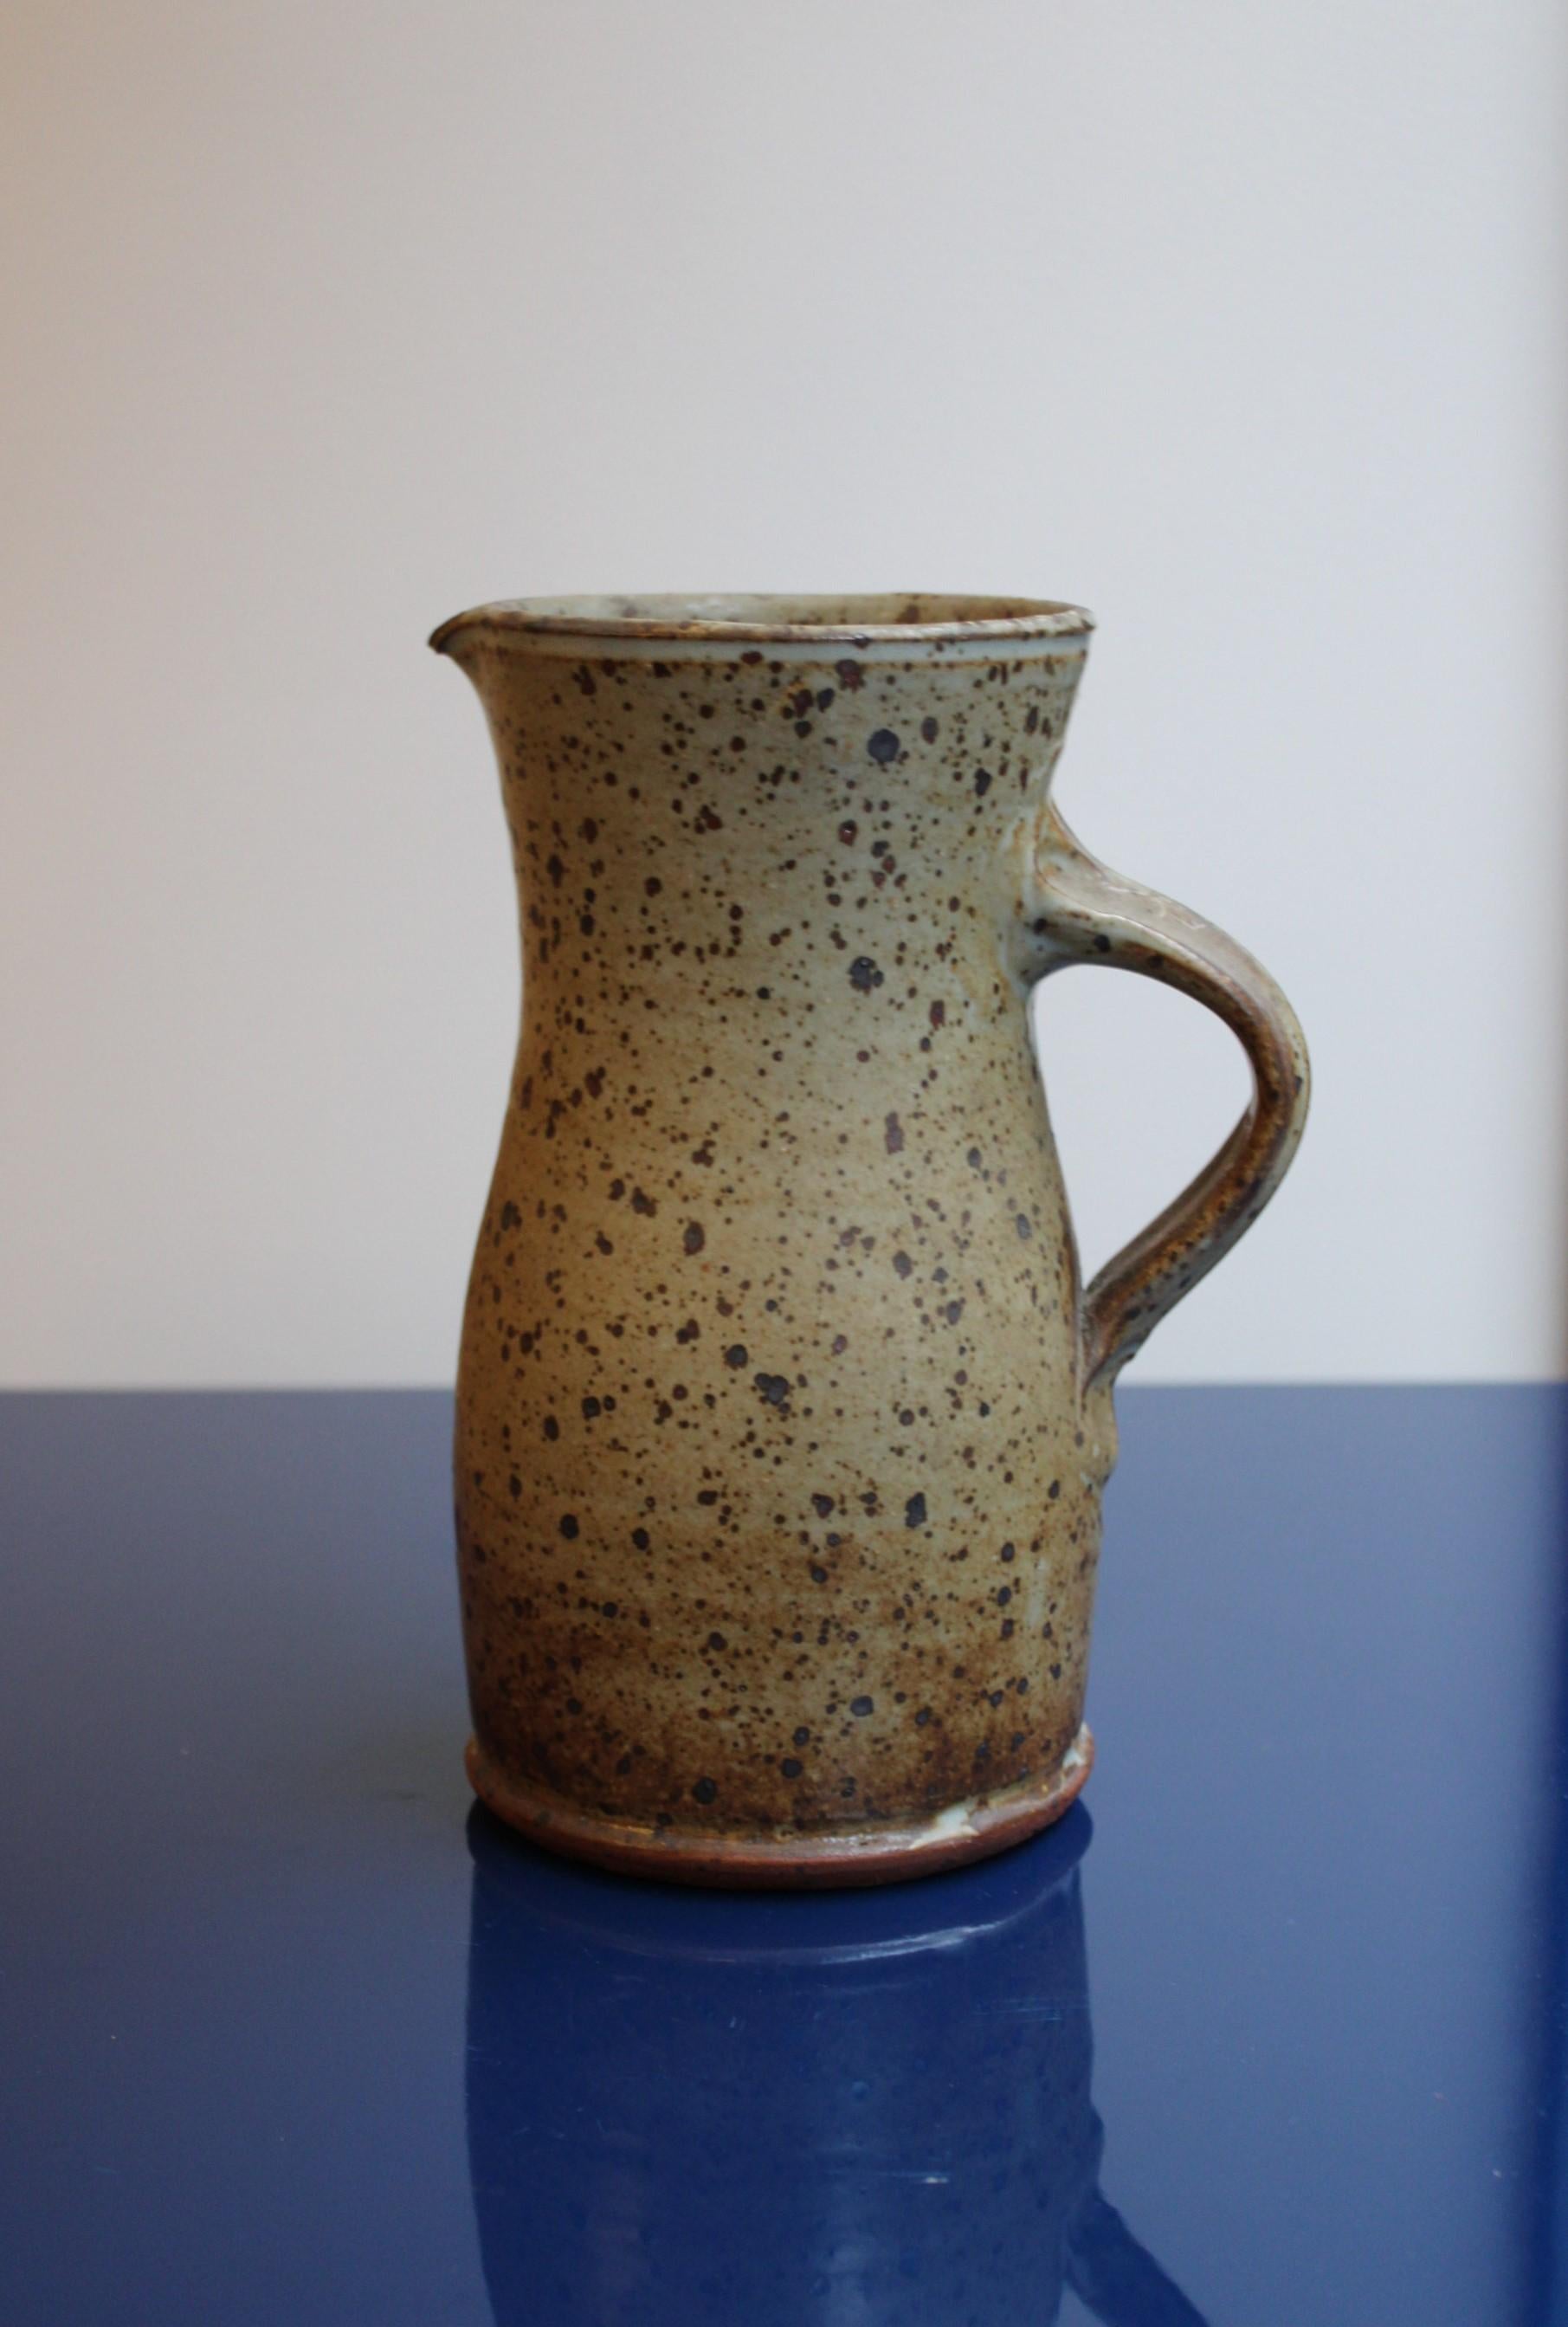 Pitcher in pyrite sandstone by the French ceramist Gustave Tiffoche (1930-2011)
Signed.